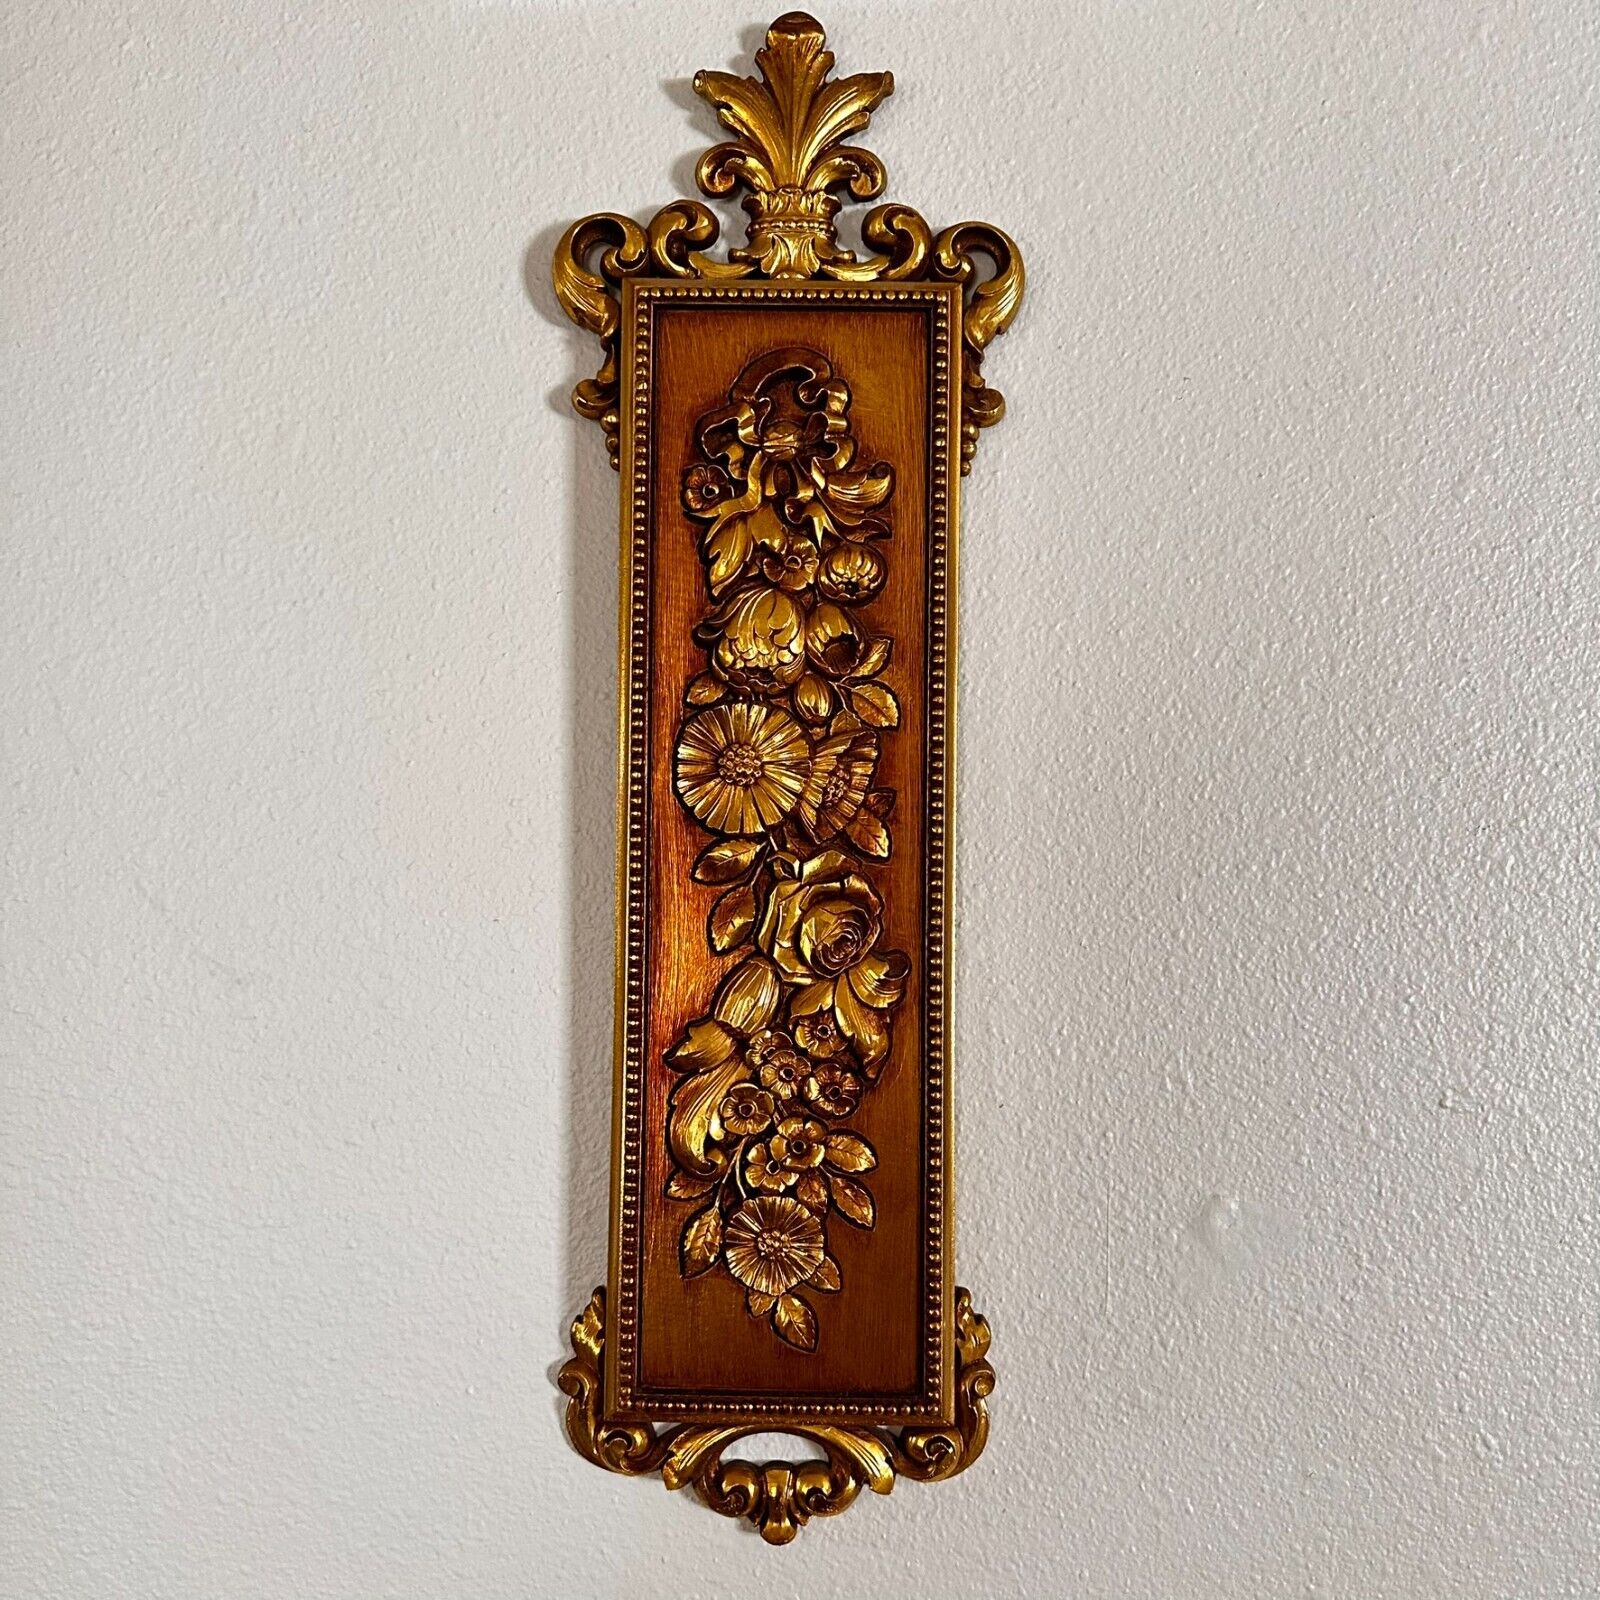 Vintage MCM Syroco Ornate Wall Plaque Floral Gold Accent Baroque Decor